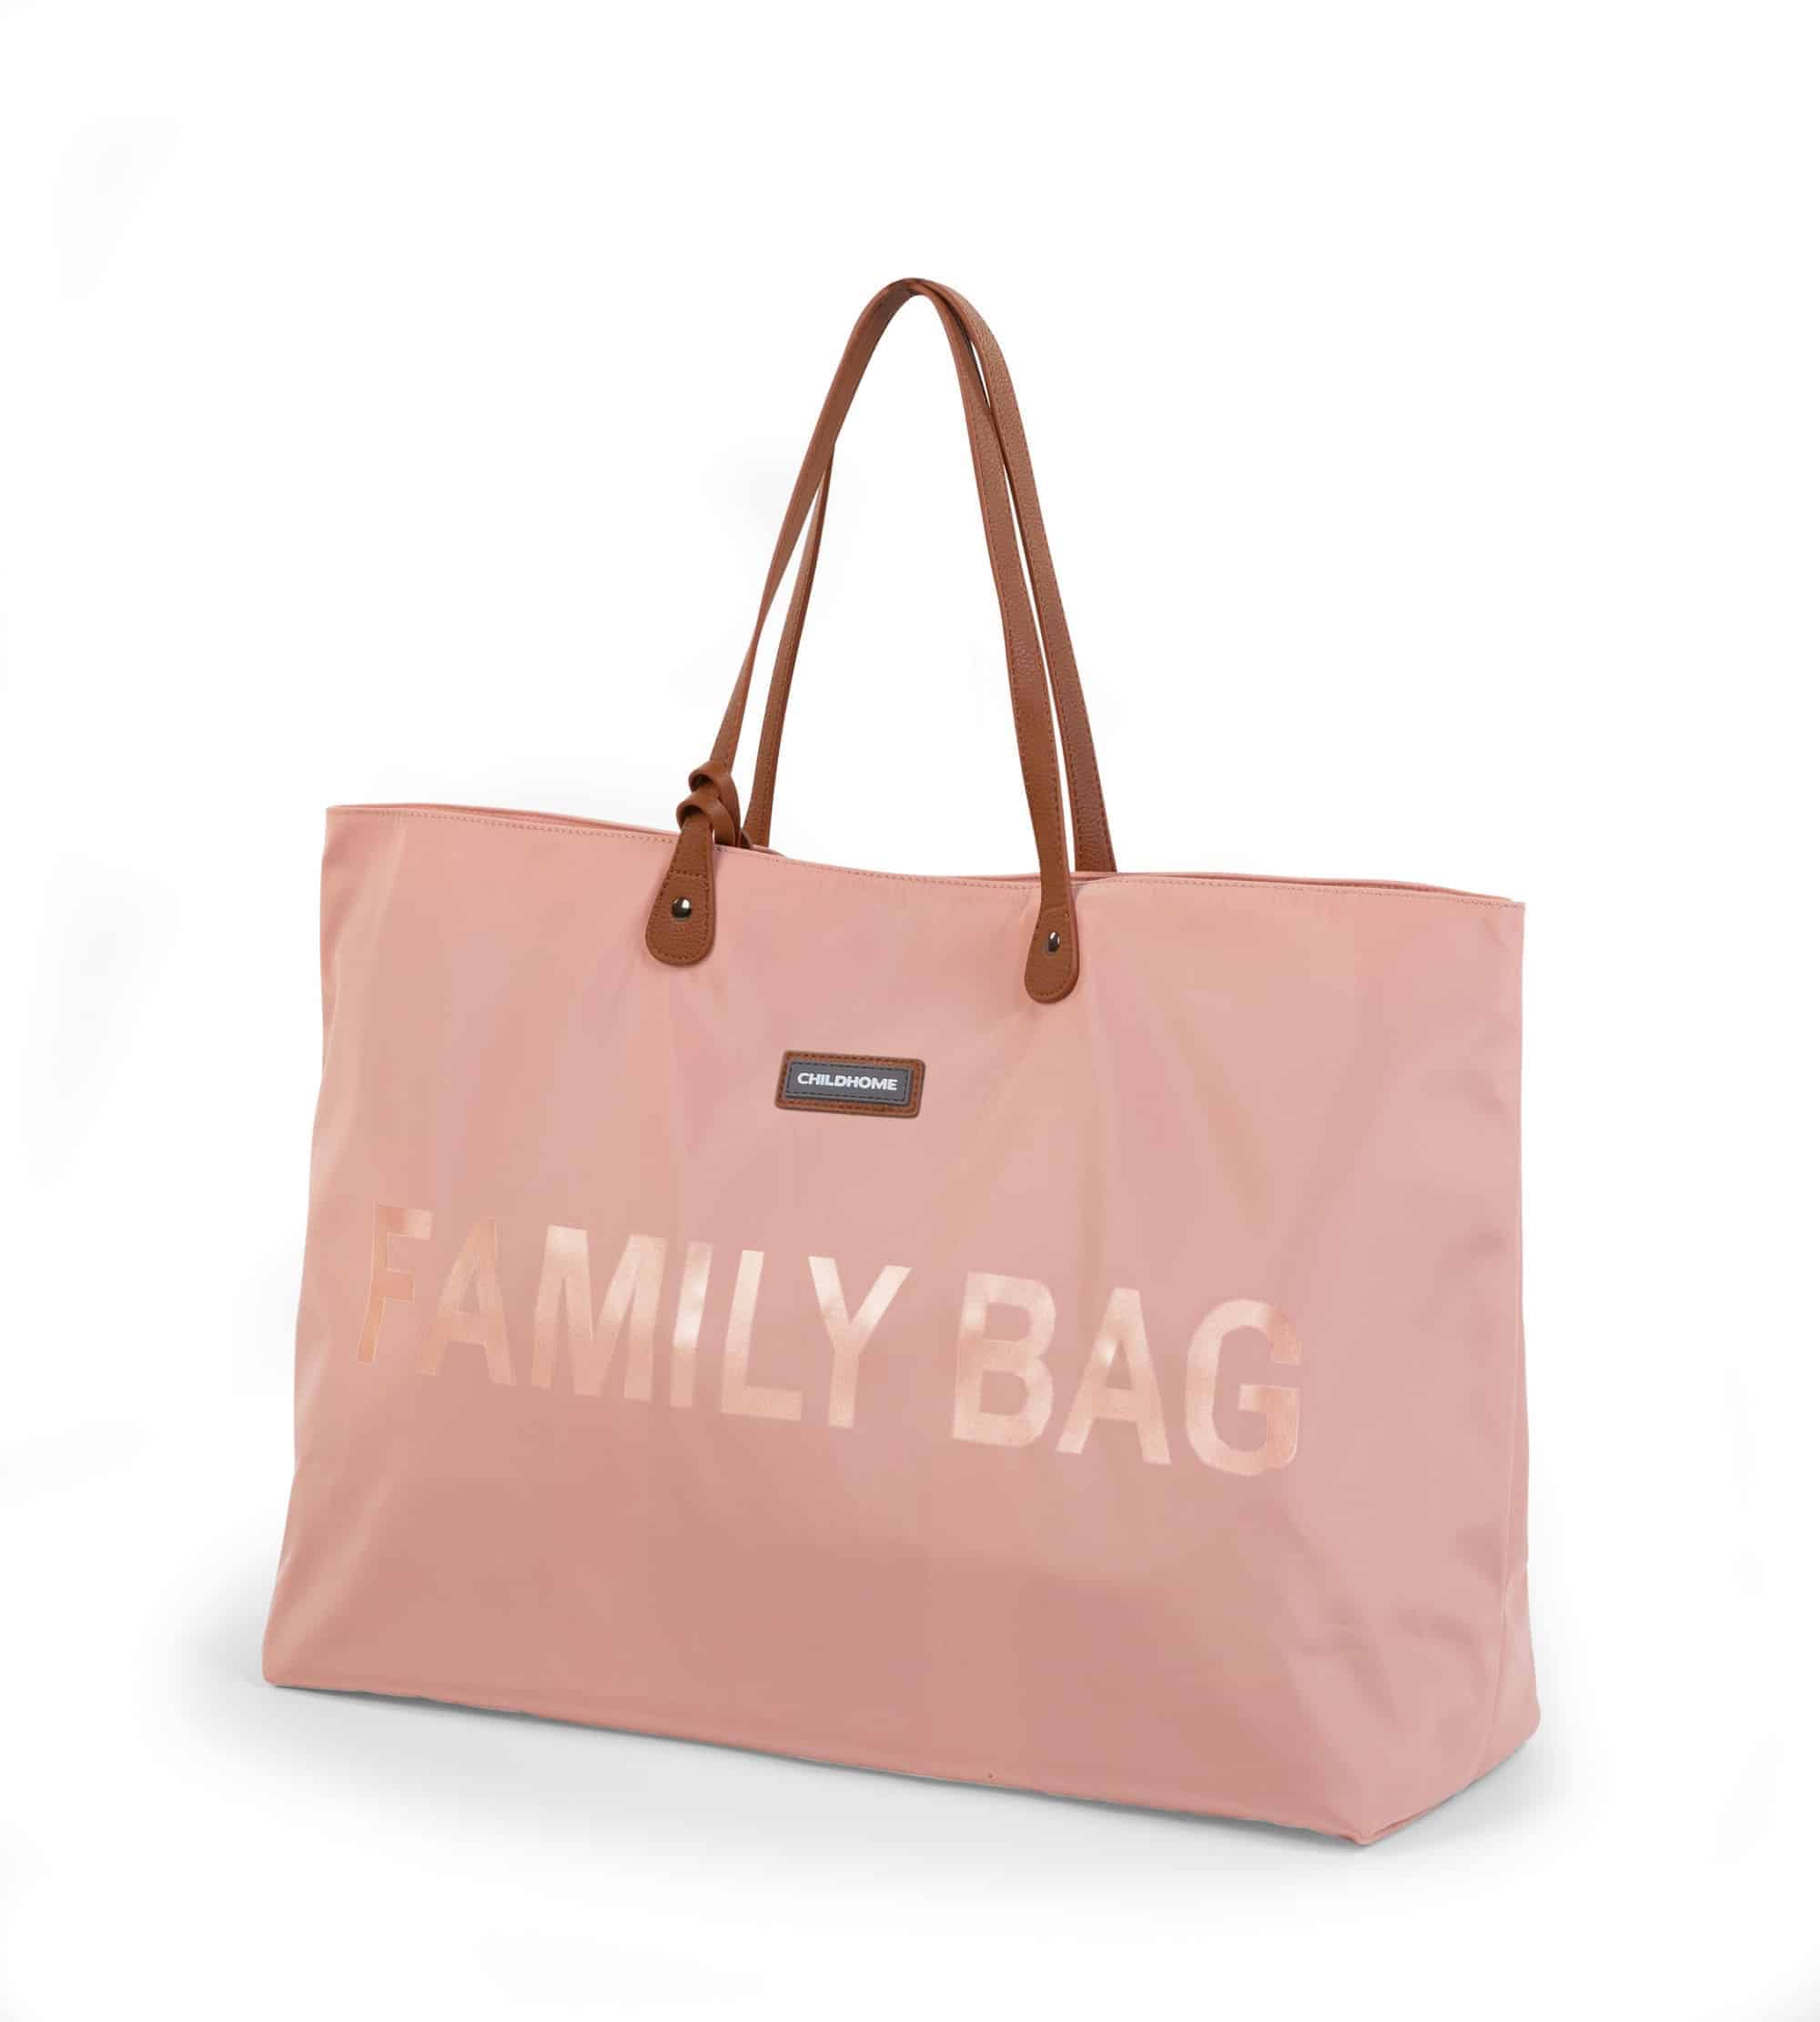 Childhome FAMILY BAG PINK/COPPER